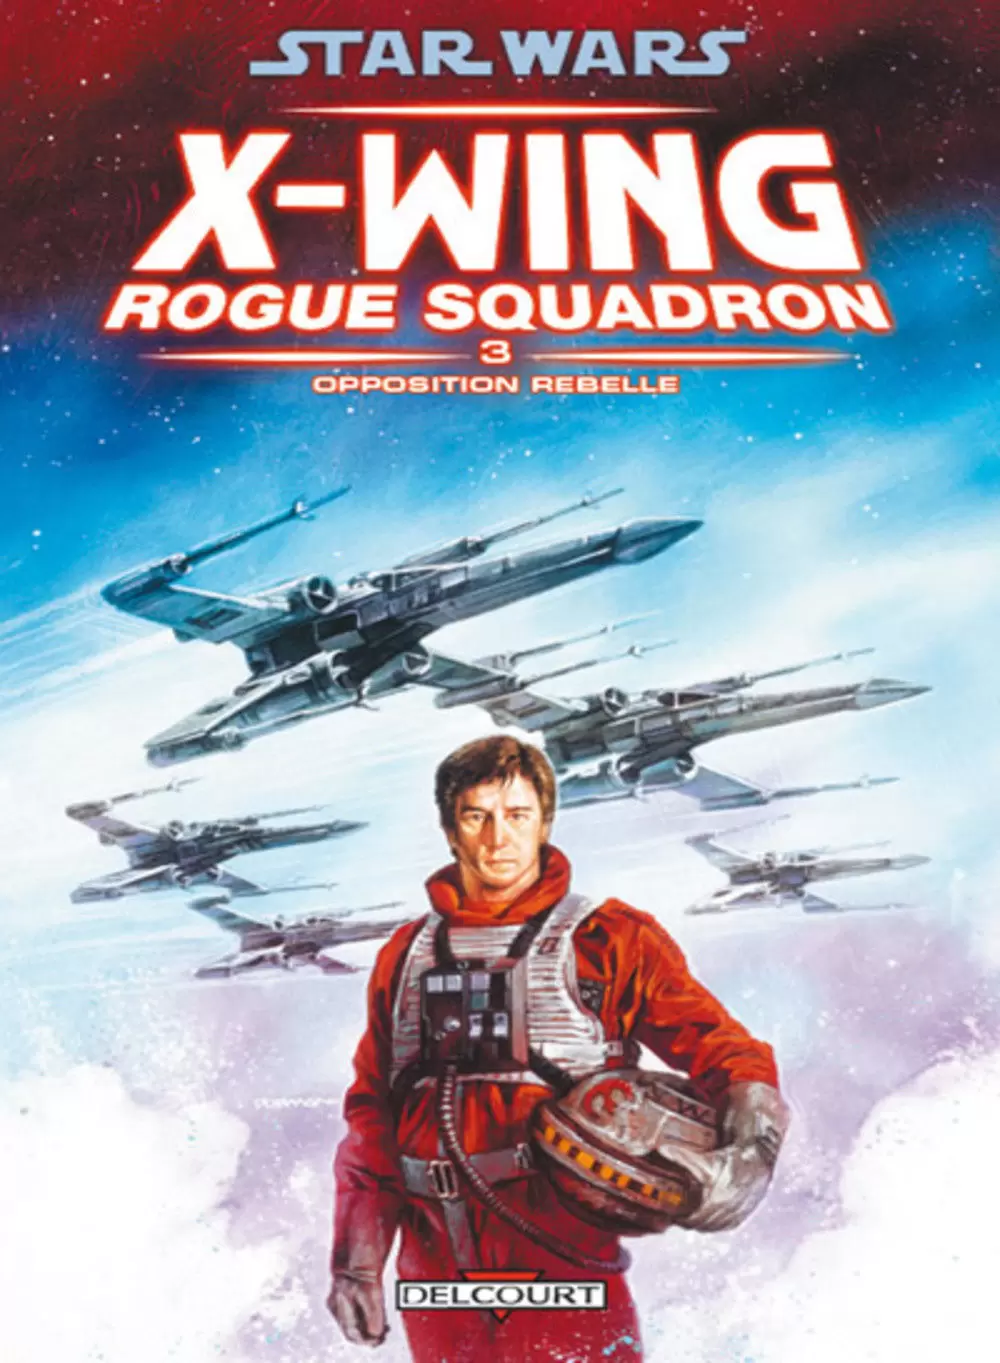 Star Wars - Delcourt - X-Wing Rogue Squadron : Opposition rebelle